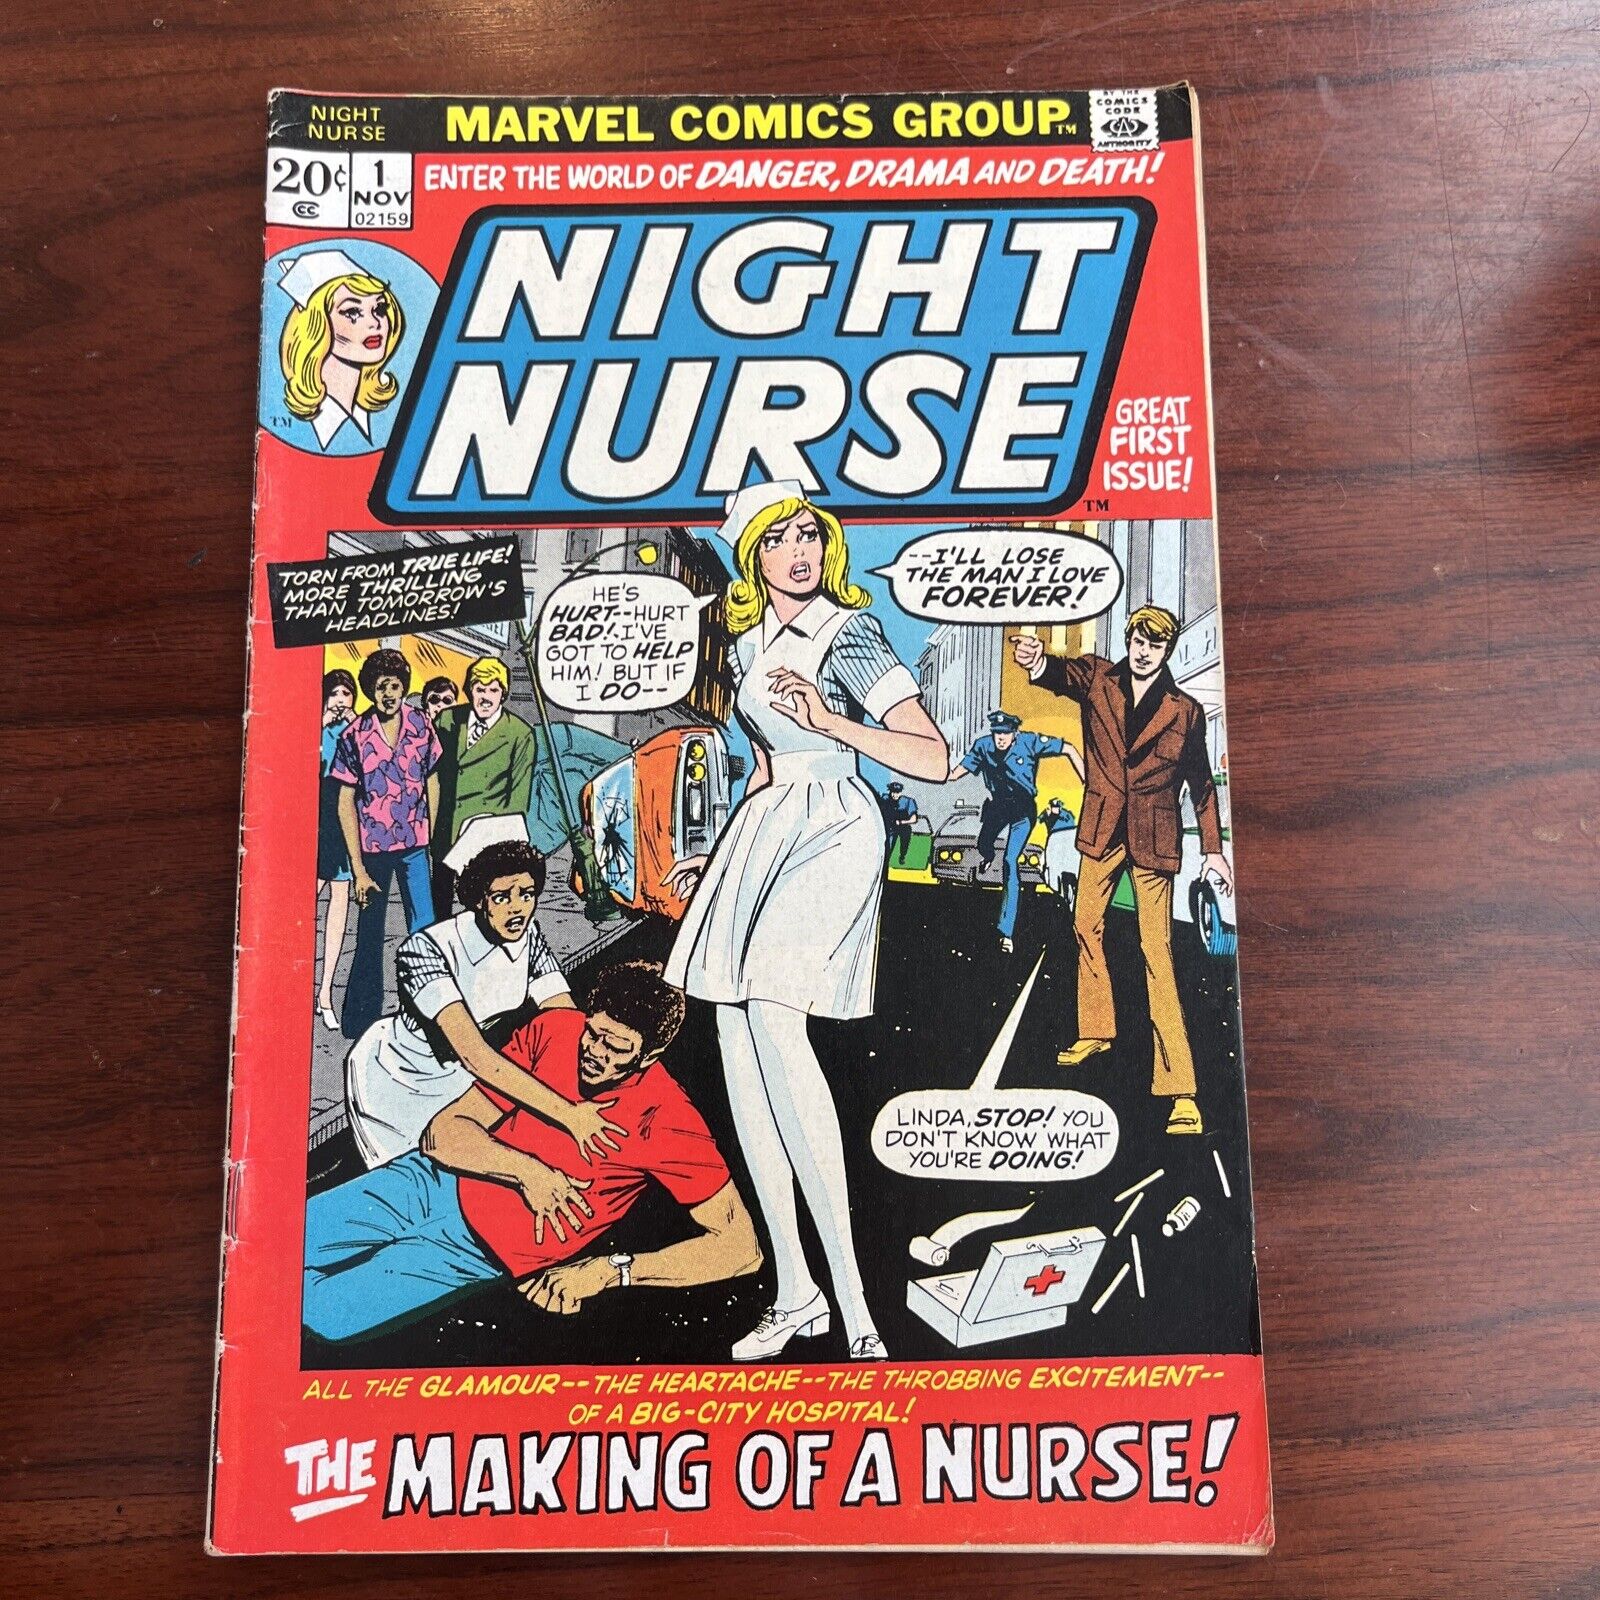 Night Nurse #1 - The Making of a Nurse Marvel Comics 1972 First Issue